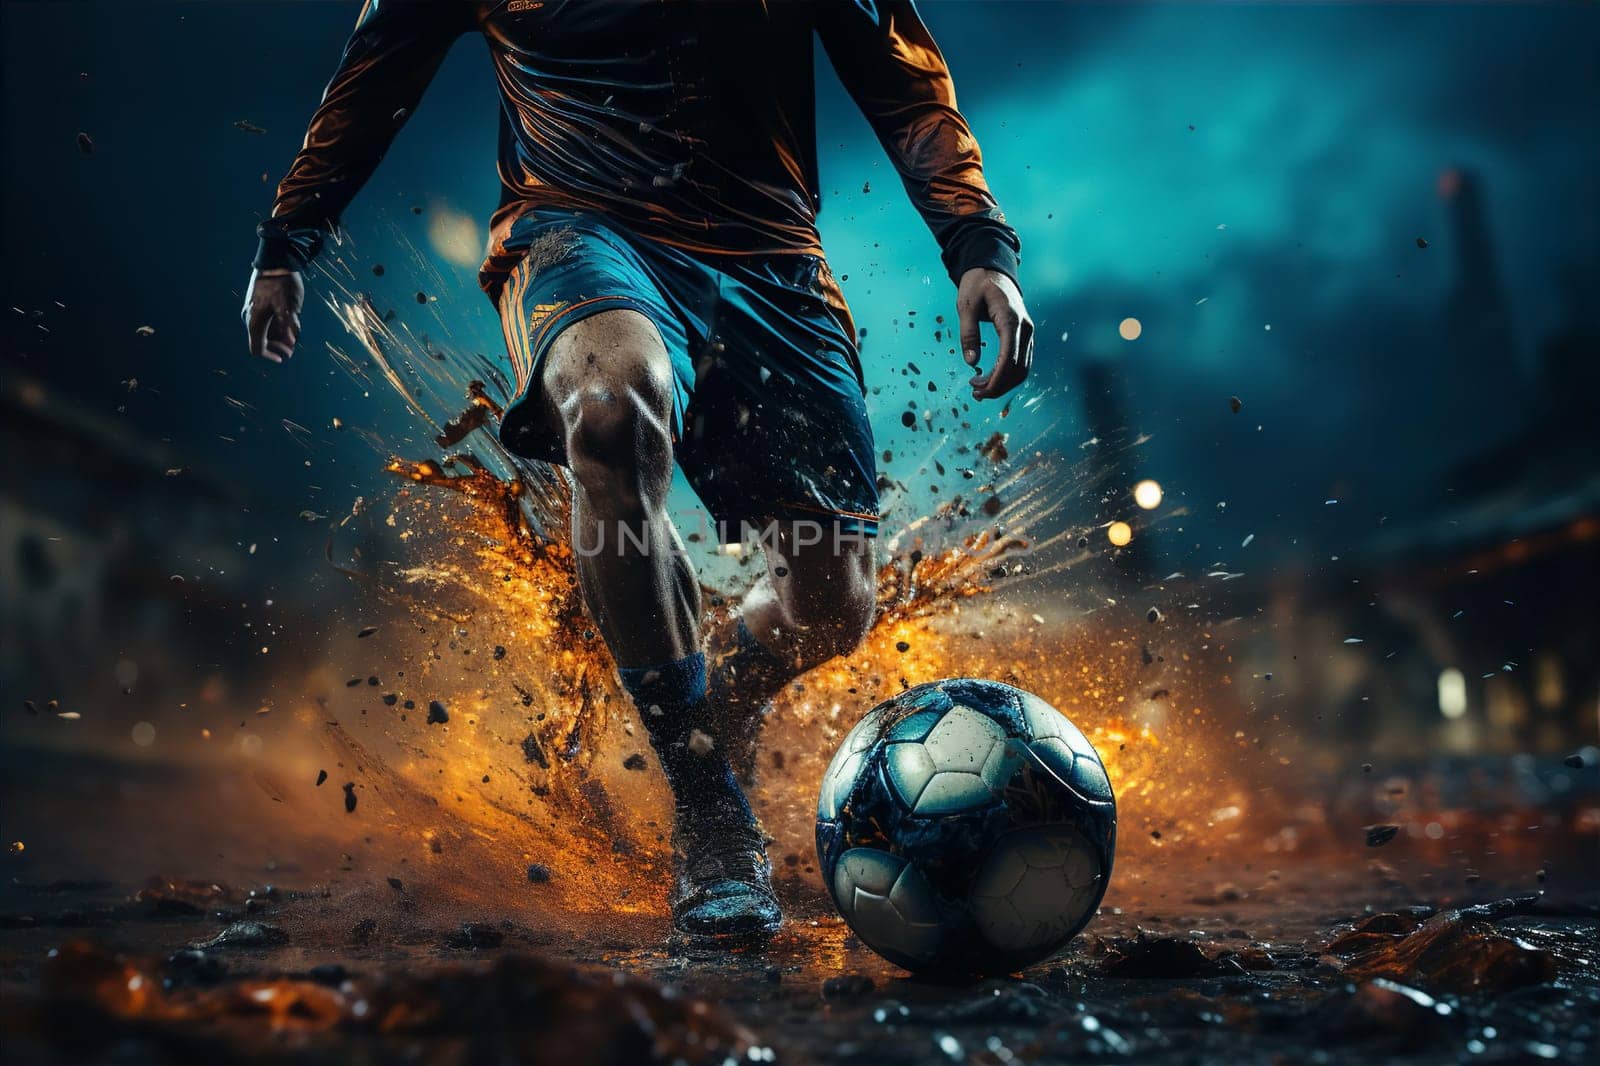 Soccer player feet kicking ball on dirty field by kuprevich